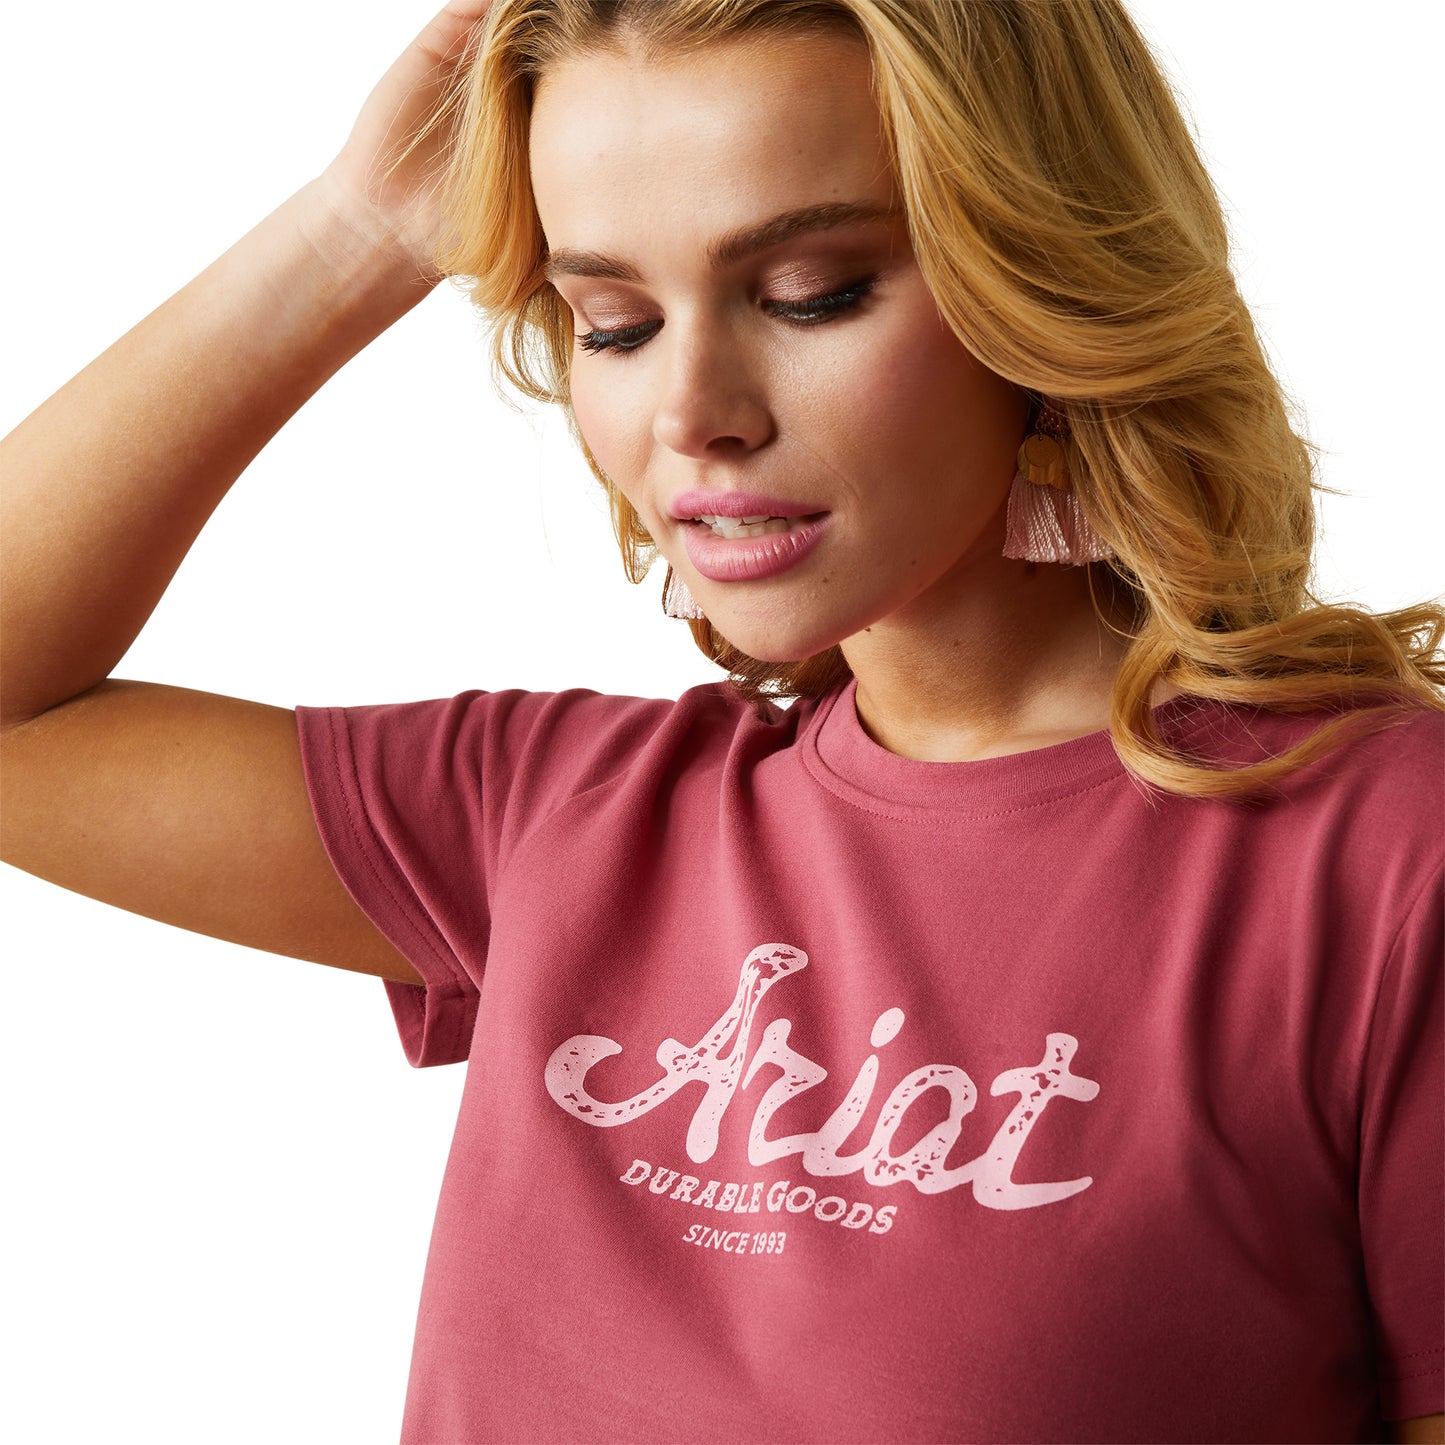 Ariat® Ladies R.E.A.L™ Durable Goods Earth Red T-Shirt 10043679